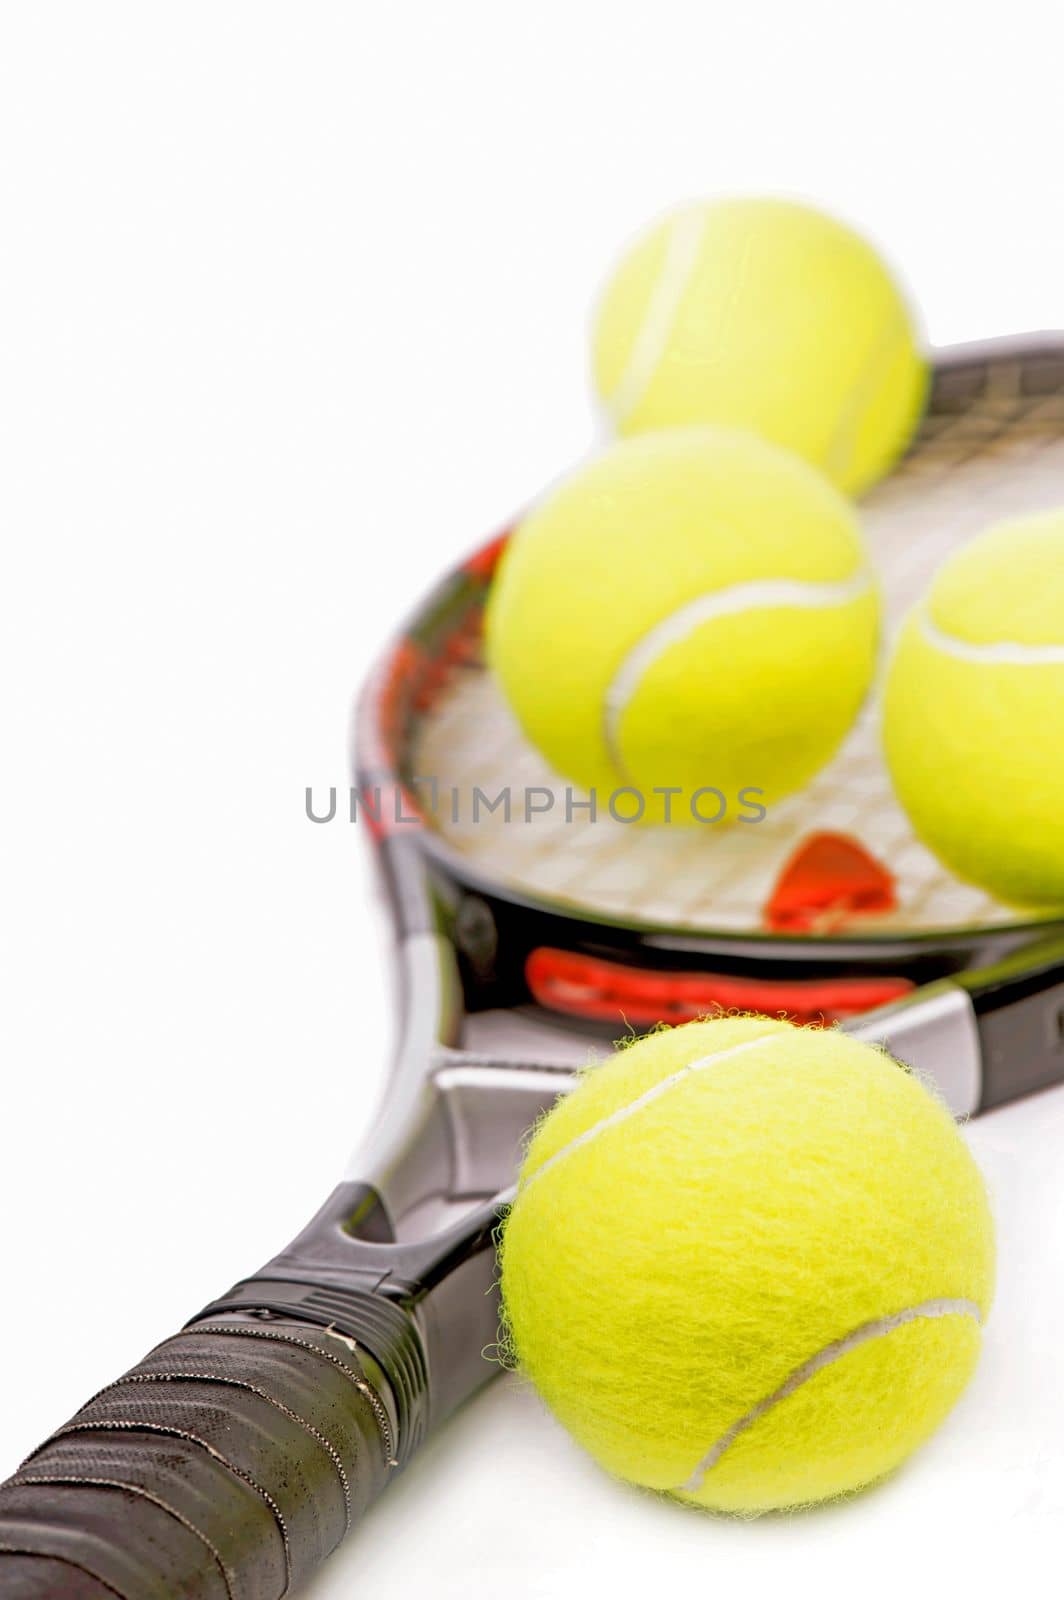 Sport tennis. Yellow tennis balls and tennis racket isolated on a white background by aprilphoto